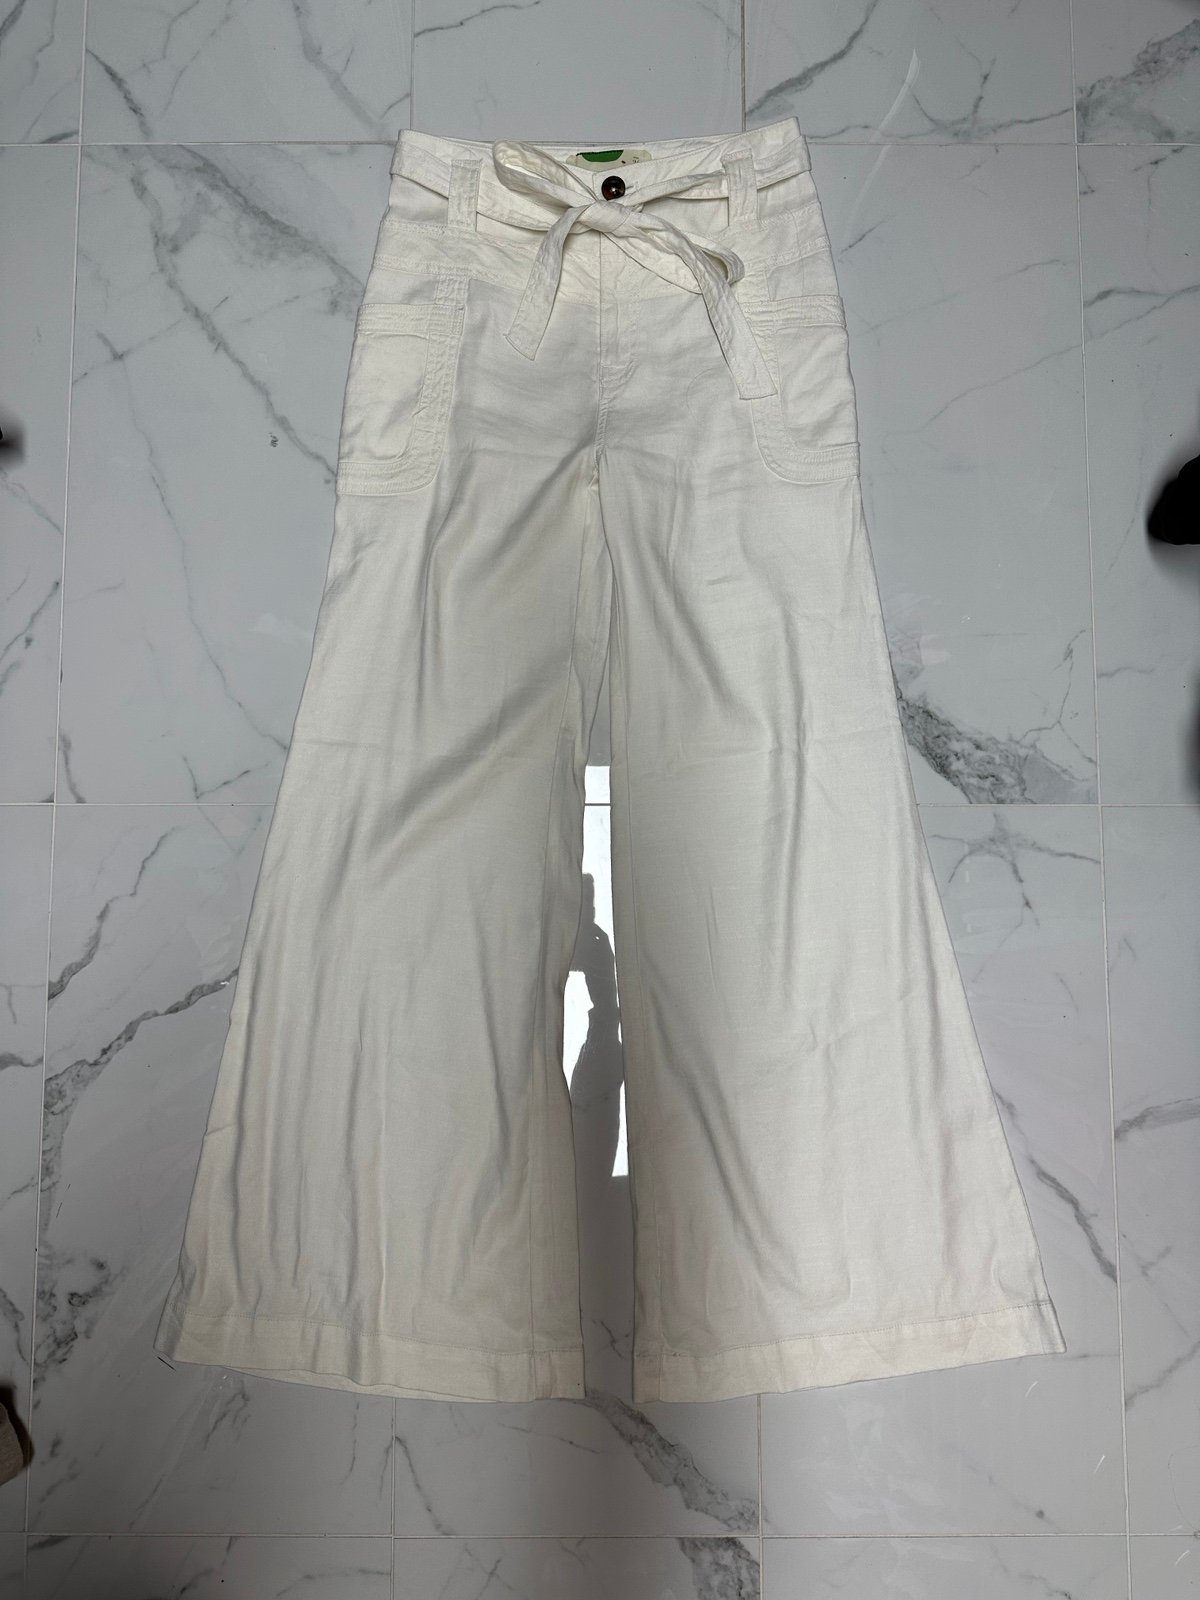 Factory Direct  Anthropologie White Ivory Belted Wide Leg Linen Pants Size 26 FKzptdq4V no tax